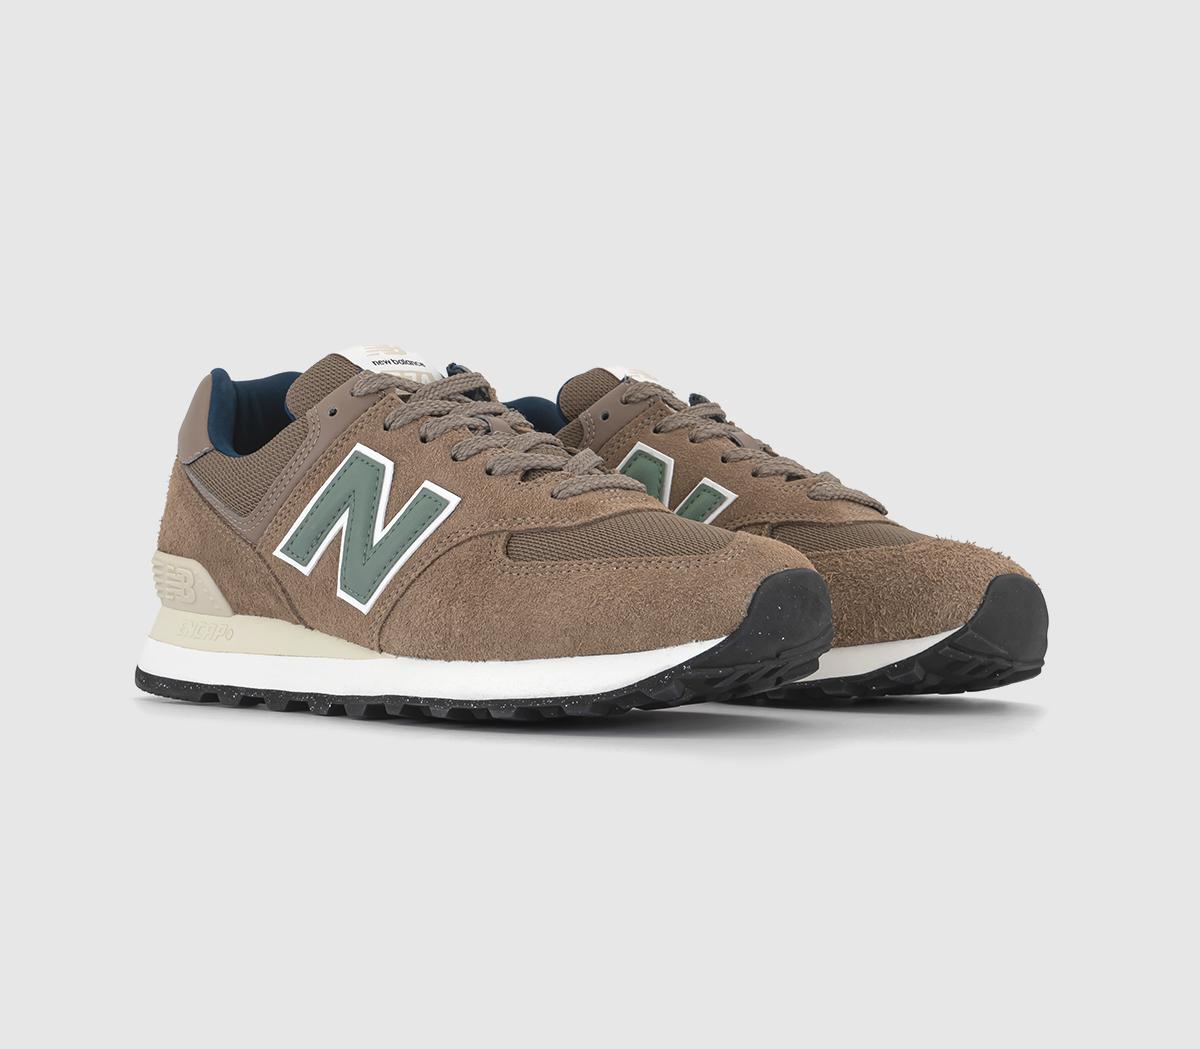 New Balance 574 Trainers Brown Green, 8